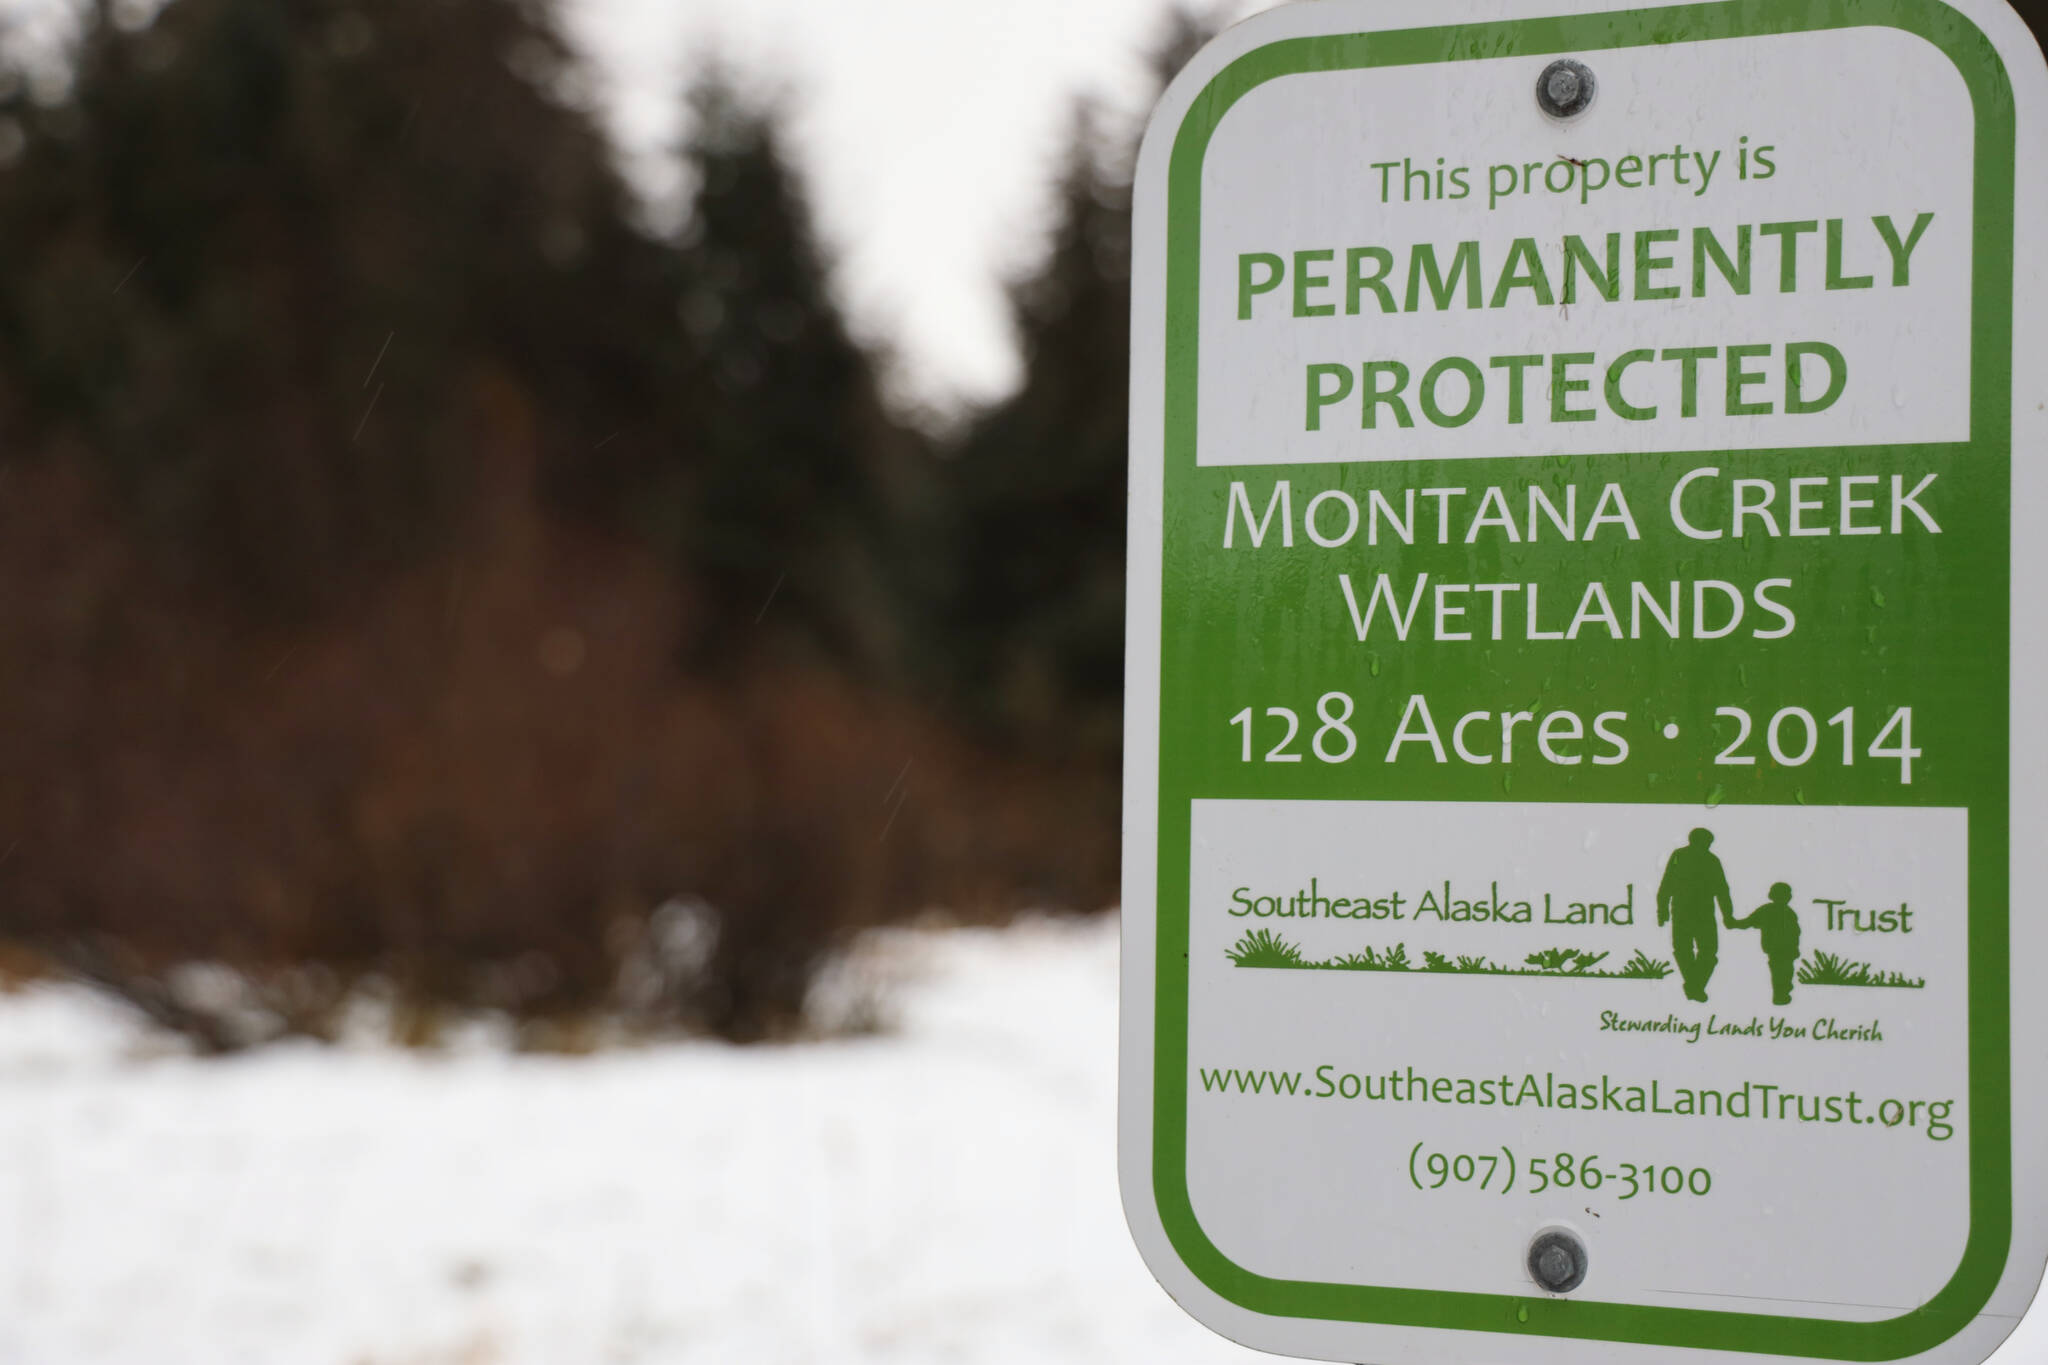 Rain drizzles on a sign Wednesday morning at a trailhead leading into the Montana Creek Wetlands area. A public meeting was held Wednesday evening presenting a revised Montana Creek draft master plan. (Clarise Larson / Juneau Empire)